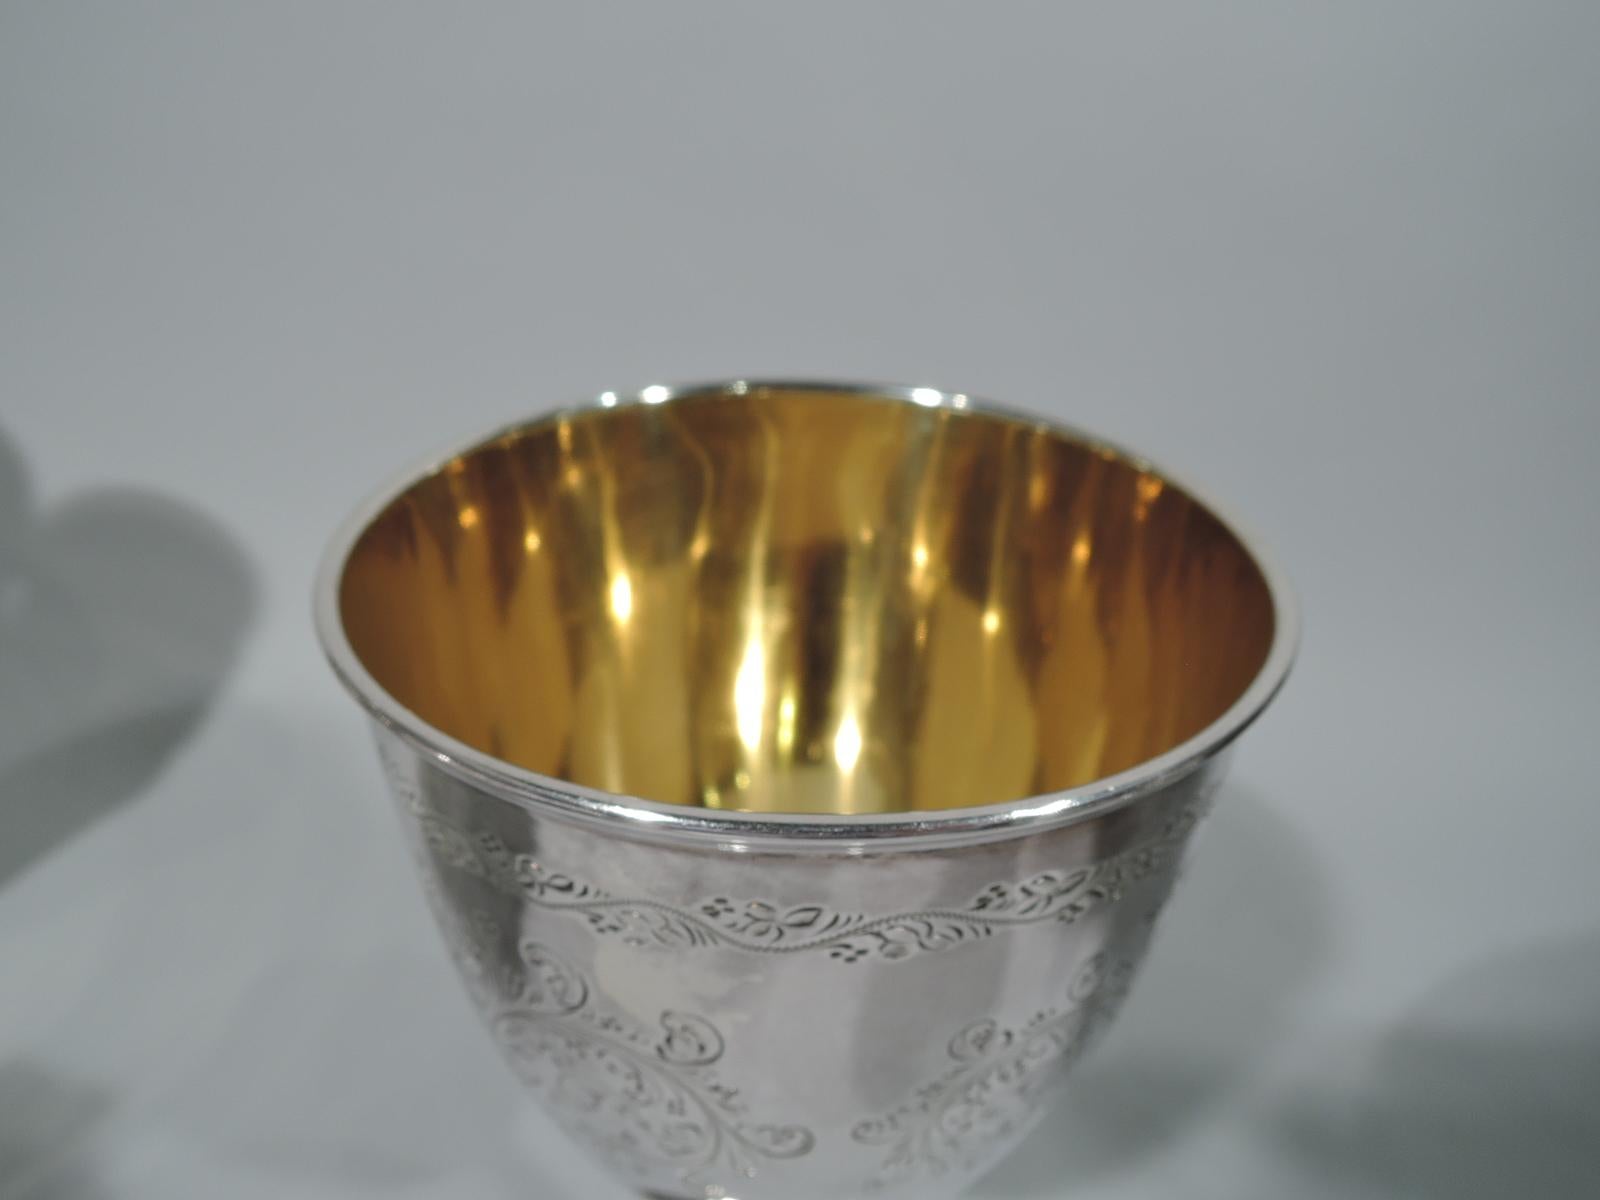 Victorian sterling silver goblet. Made by Atkin Brothers in Sheffield, England in 1877. Bowl has curved and tapering sides. Cylindrical stem terminates in raised foot. Exterior engraved with fluid leaf volute scrolls of which two form heart frames.